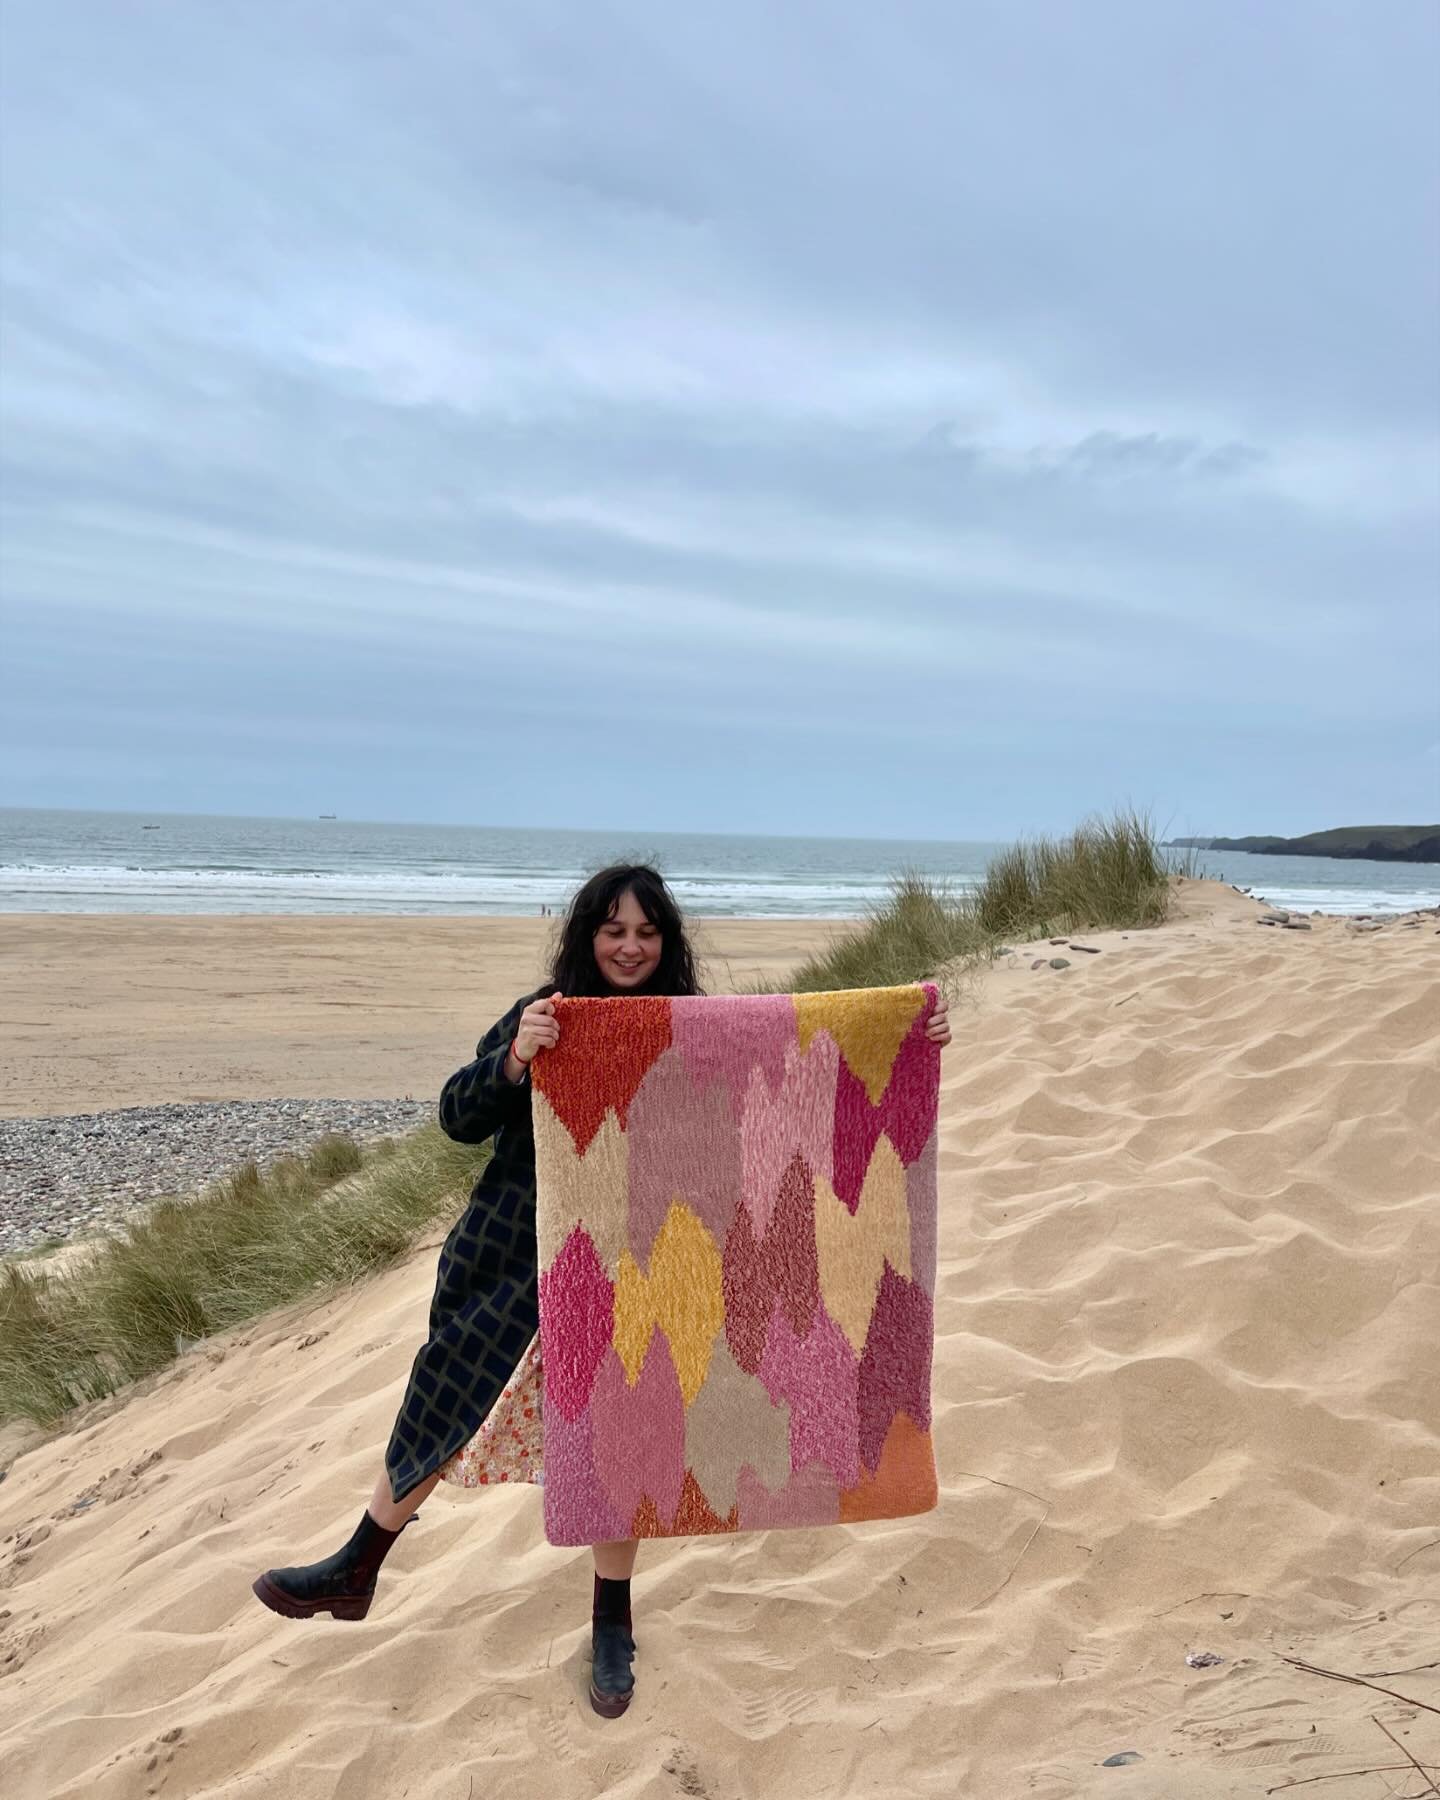 🌊Had the best time in wales last weekend! There&rsquo;s just something about the seaside and getting your toes in the sea! 

And I took the petal rug with me! This rug is inspired by visiting my grandmother in Gloucester in the summer and roaming ar